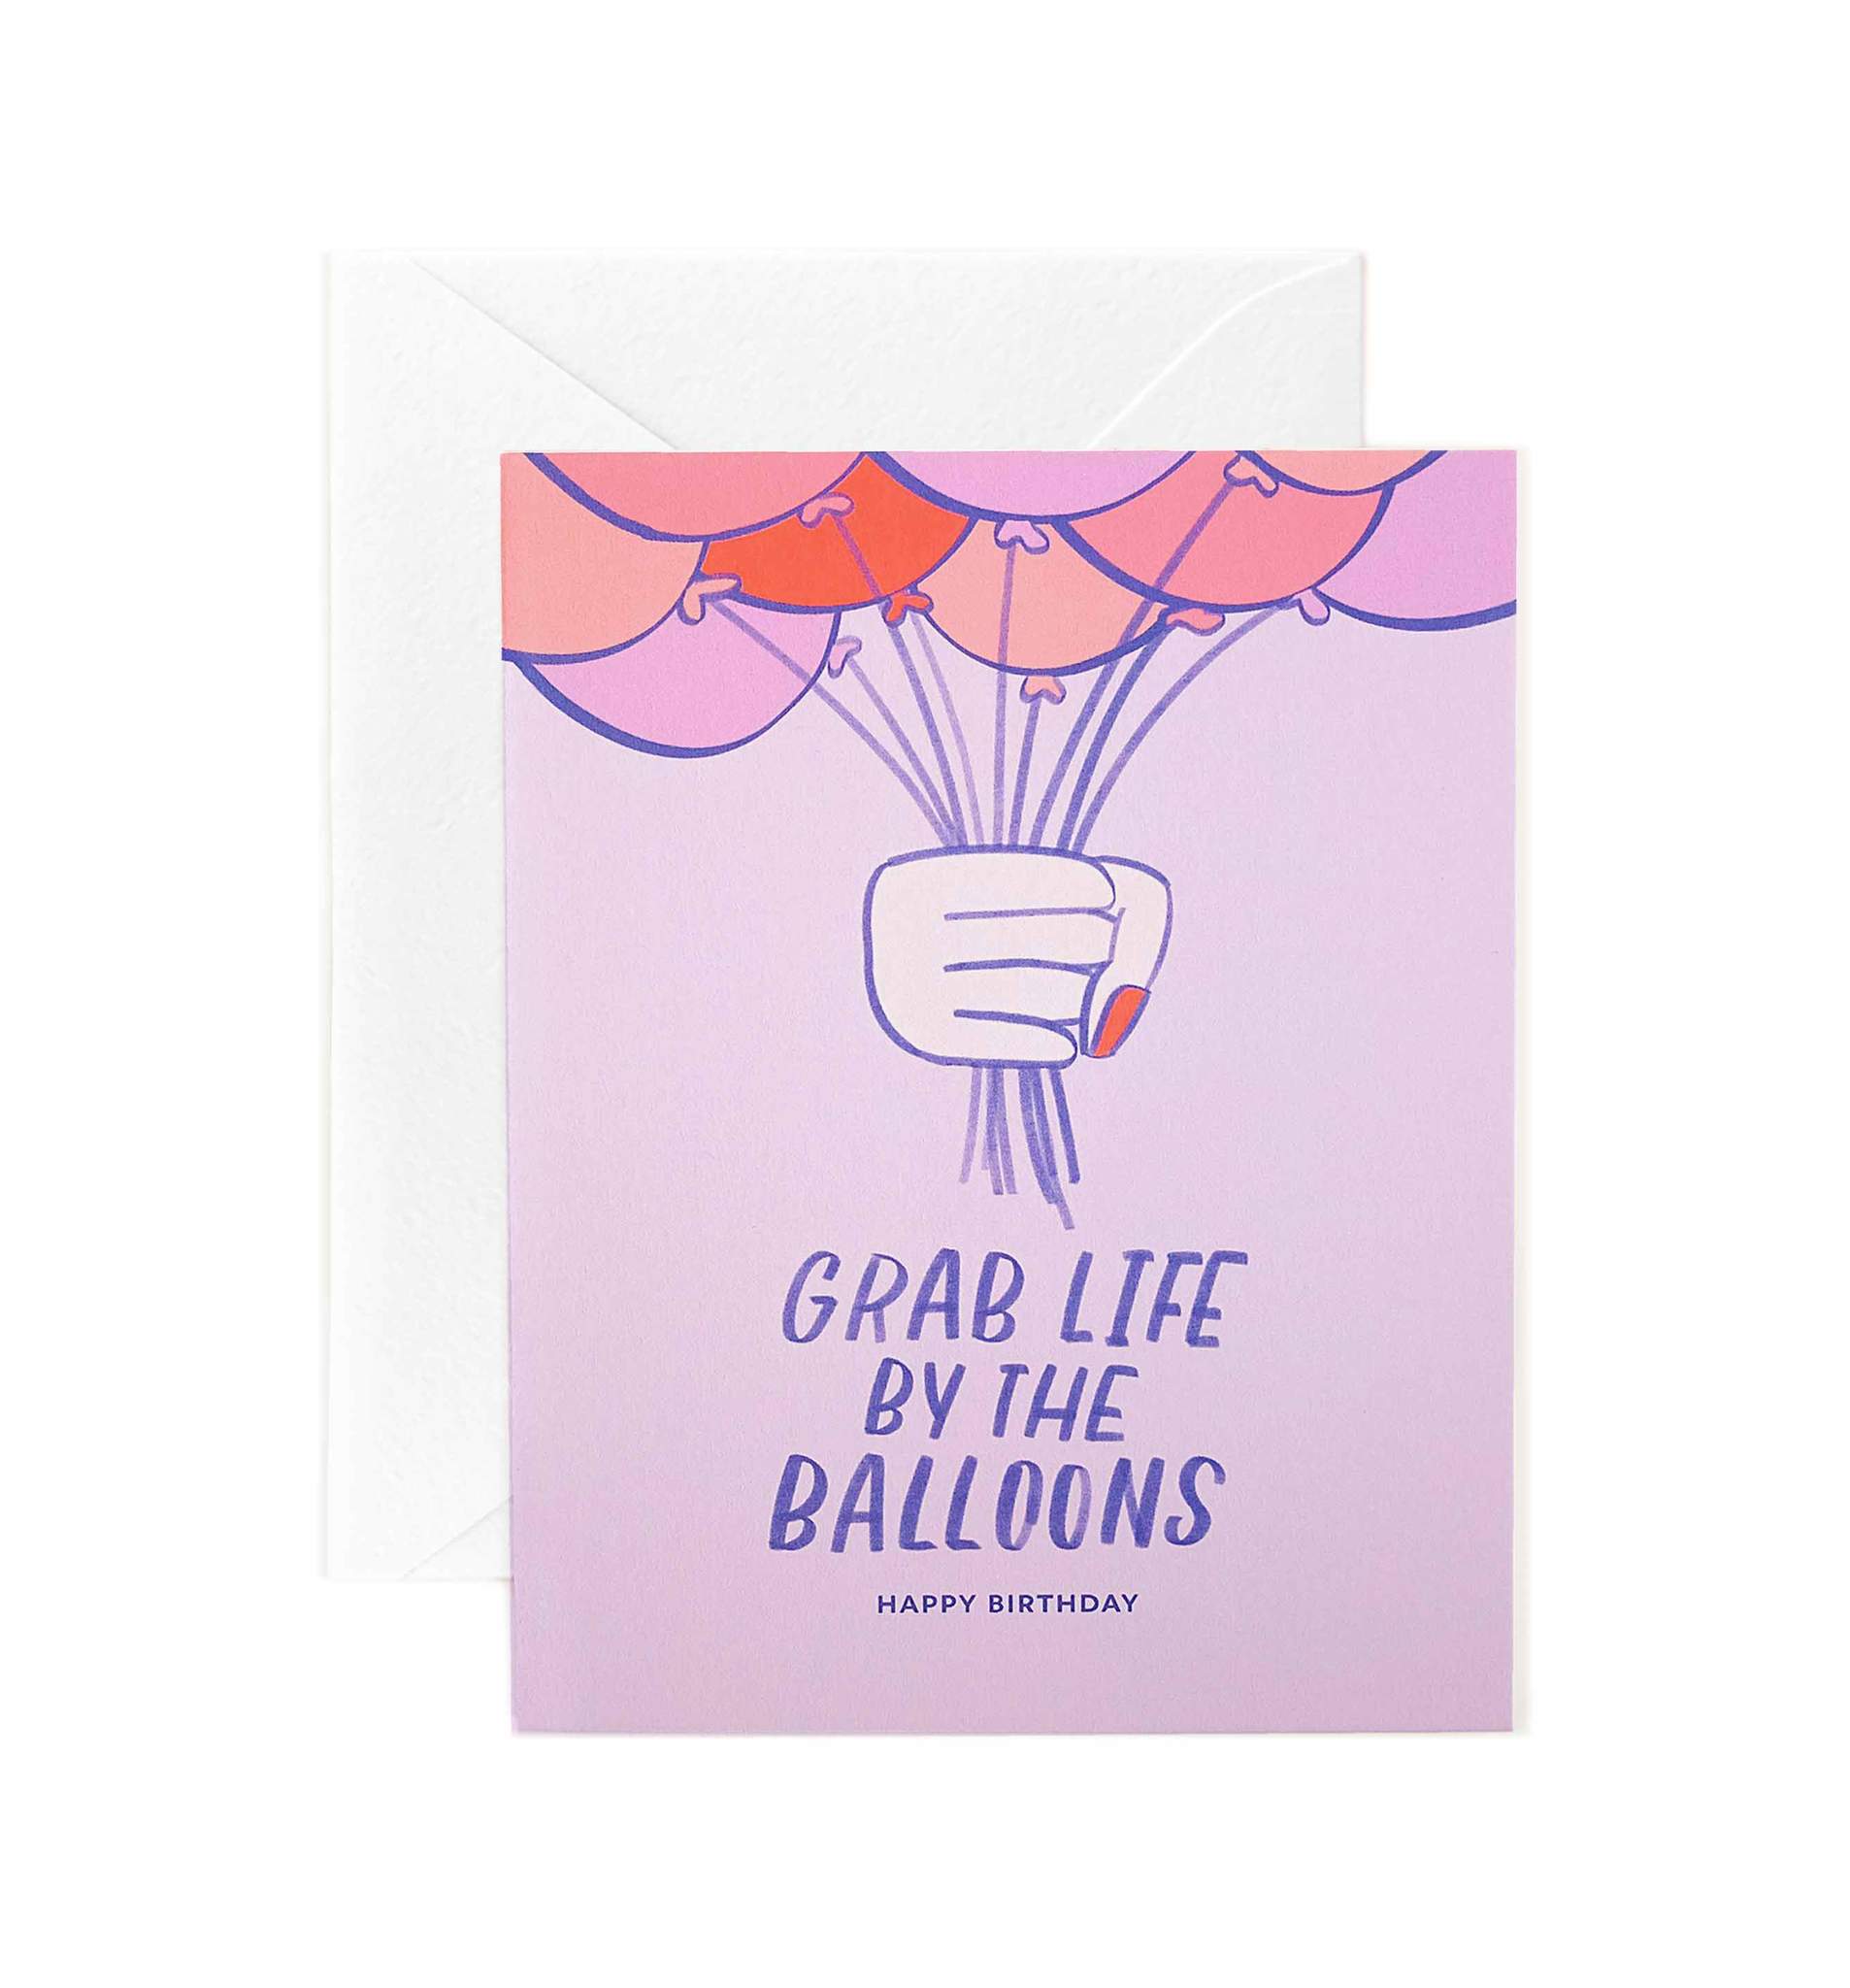 Grab Life by The Balloons